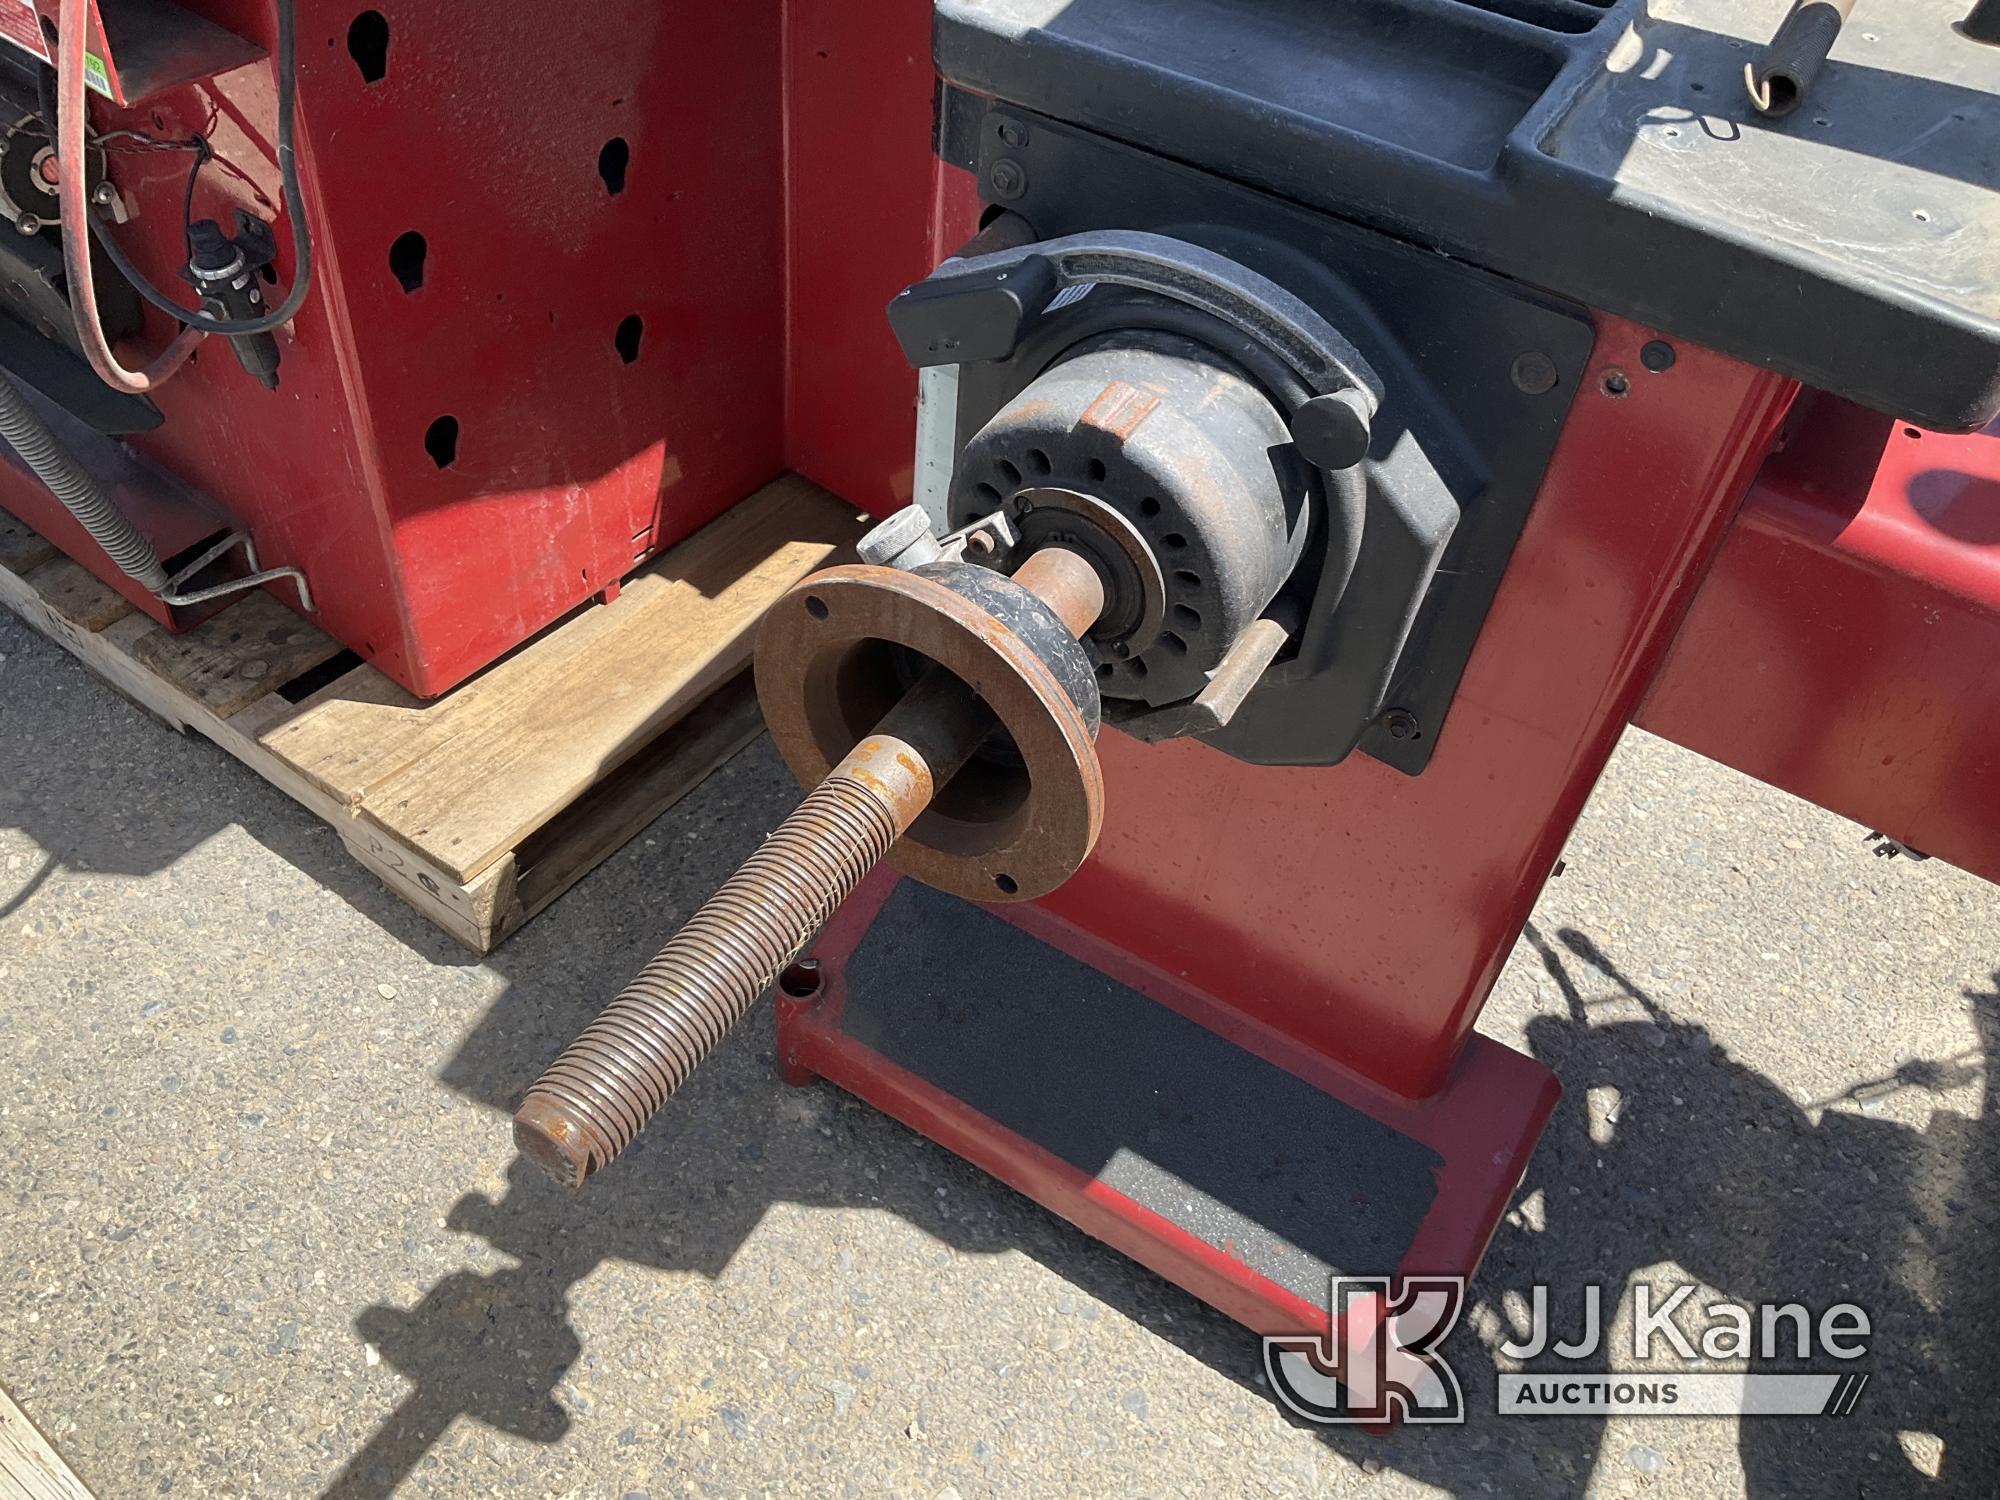 (Dixon, CA) Coats v200 Wheel Balancer (Used) NOTE: This unit is being sold AS IS/WHERE IS via Timed